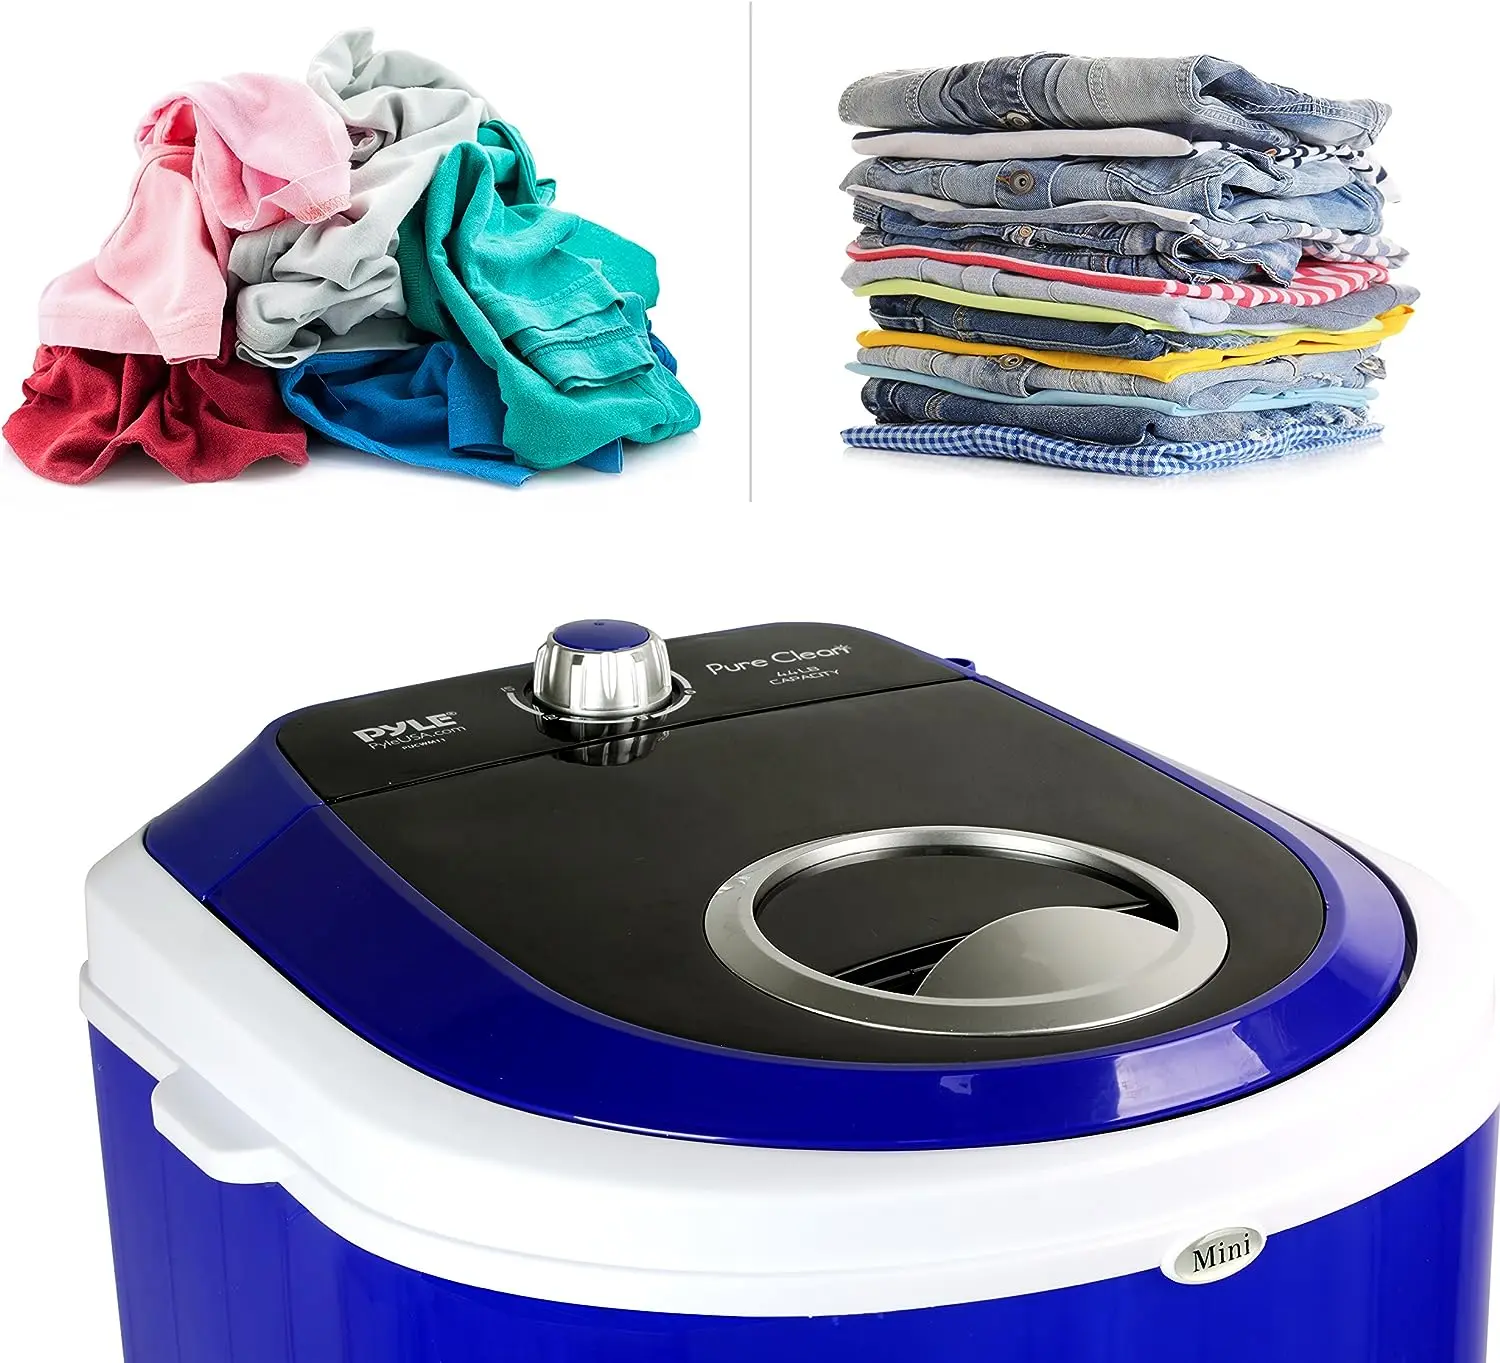 Version Portable Washer - Top Loader Portable Laundry, Mini Washing  Machine, Quiet Washer, Rotary Controller, 110V - For Compact - AliExpress